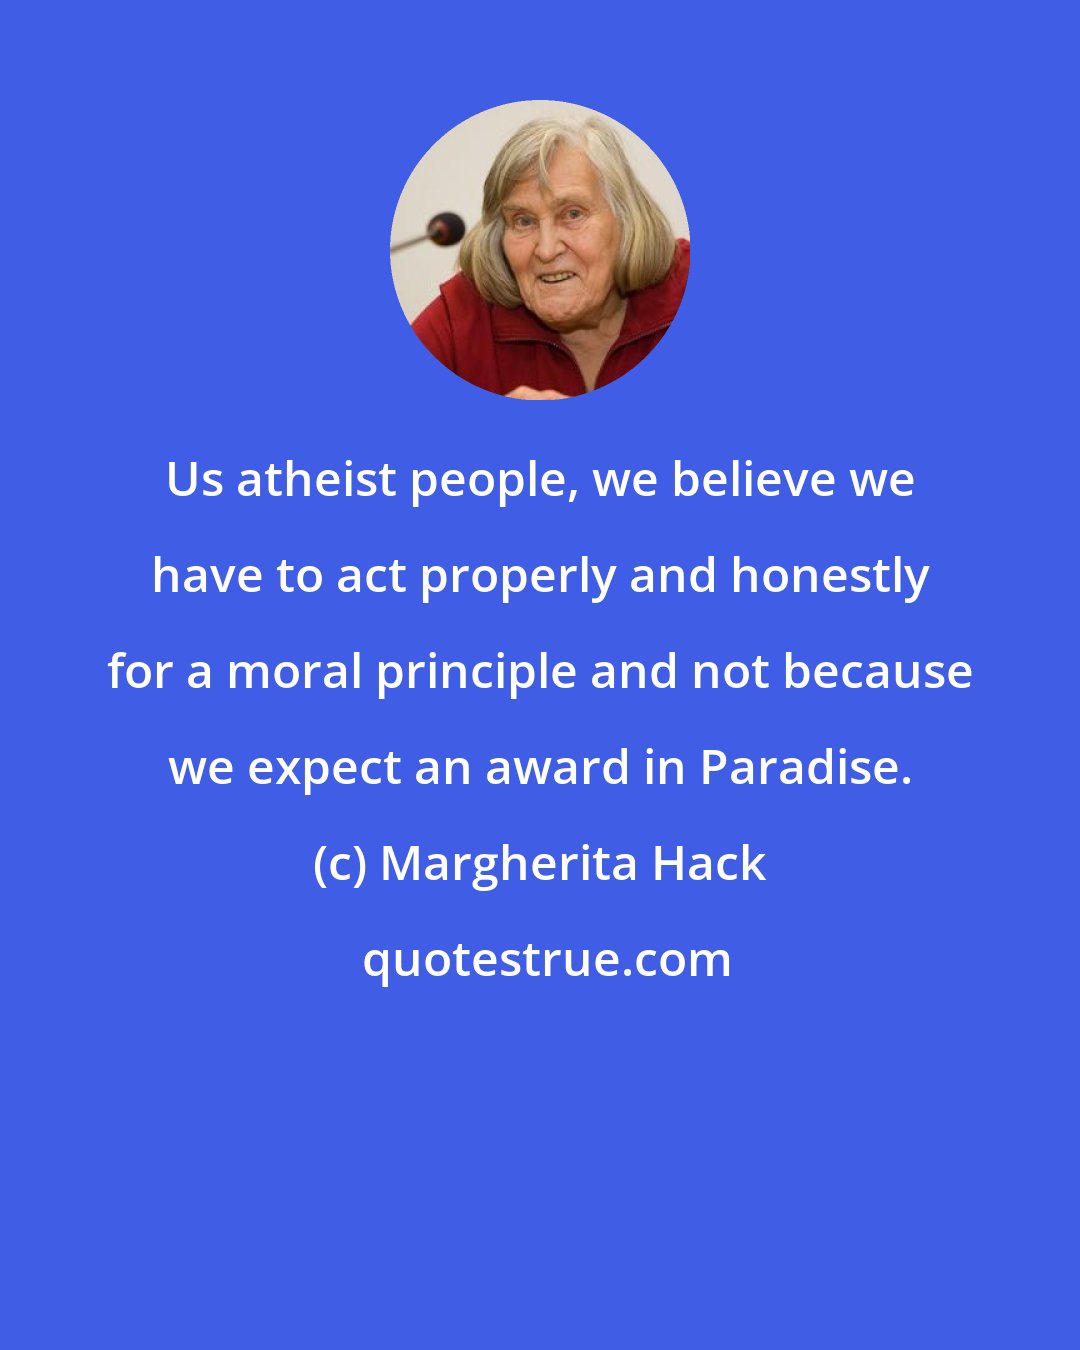 Margherita Hack: Us atheist people, we believe we have to act properly and honestly for a moral principle and not because we expect an award in Paradise.